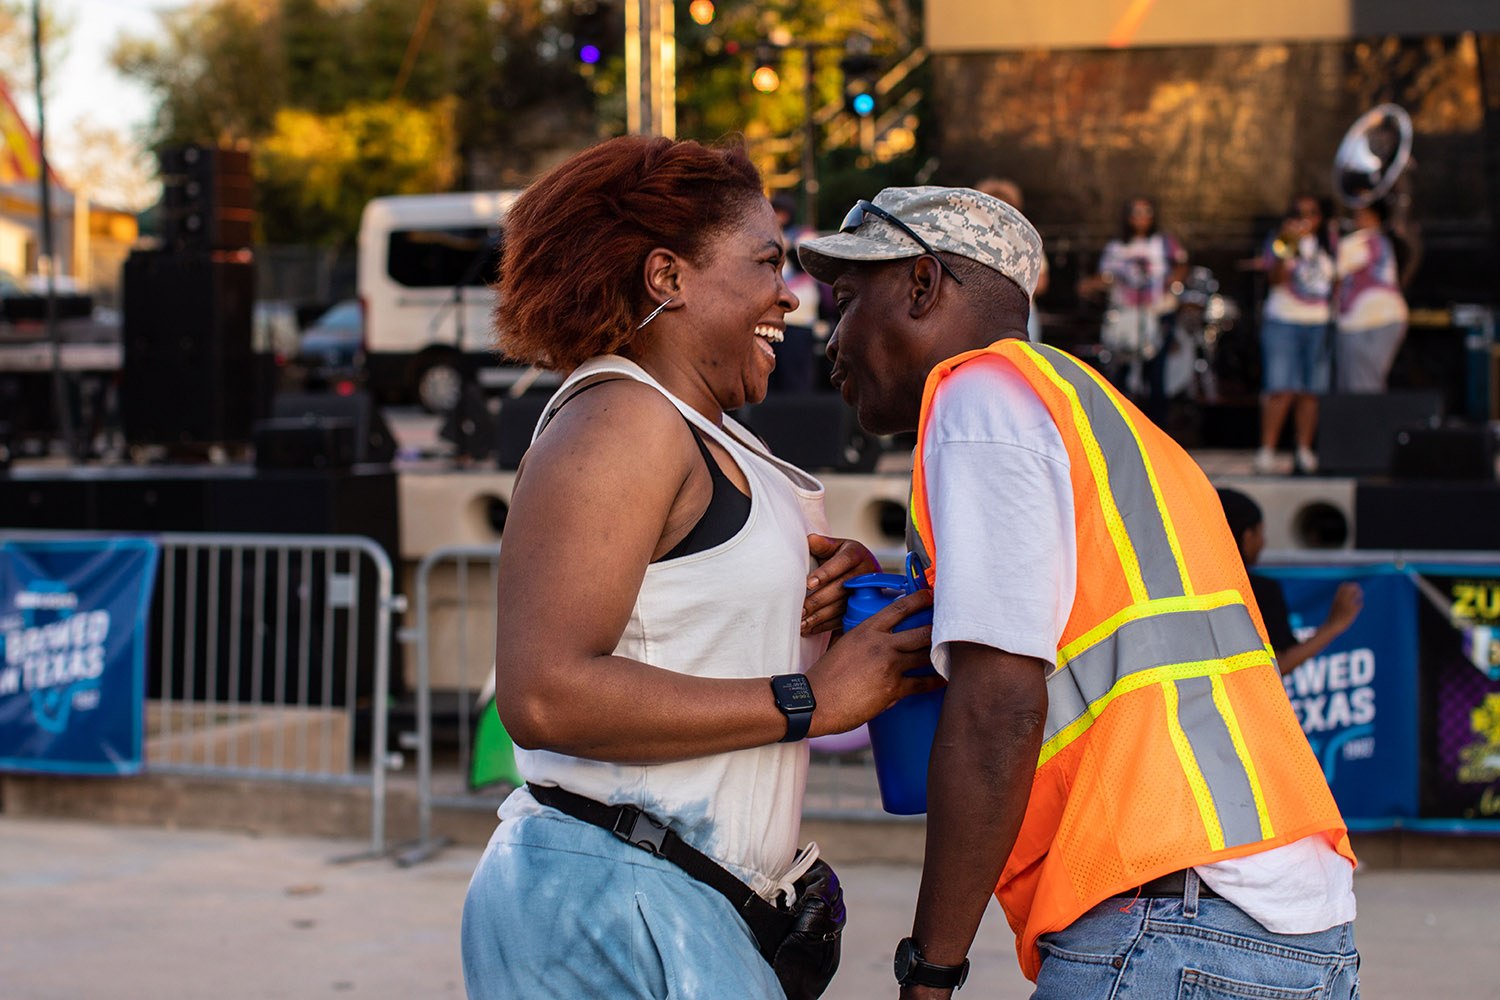 A couple dances while listening to a jazz band perform during A Taste of New Orleans, the 35th edition of the Fiesta event, on Saturday evening, April 2, 2022, at Sunken Garden Theater in San Antonio, Texas. Photo by Kaylee Greenlee Beal | Heron contributor